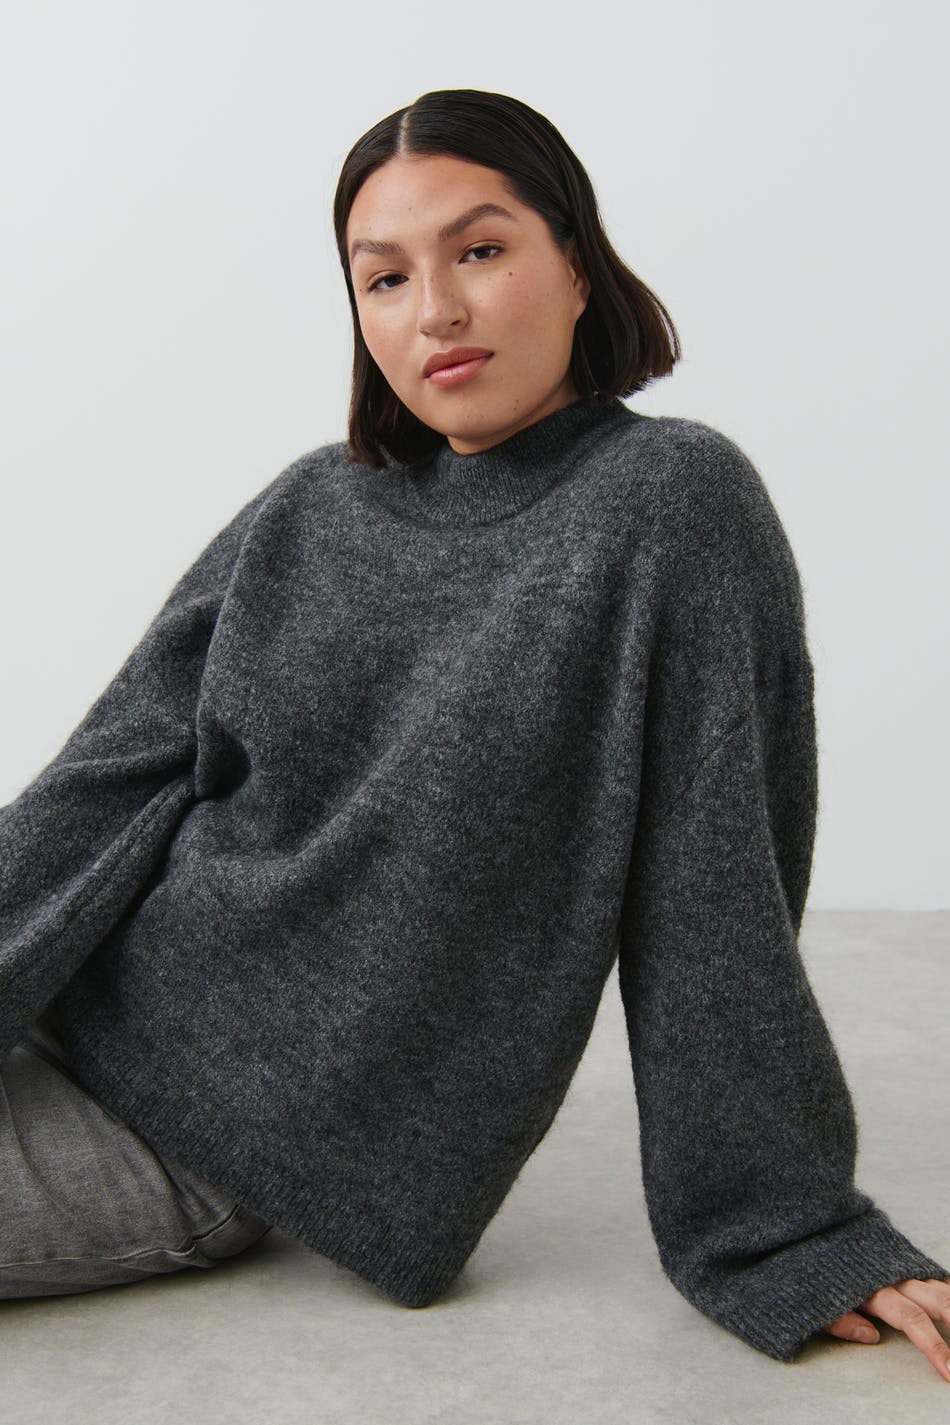 Round-neck knitted sweater - Woman